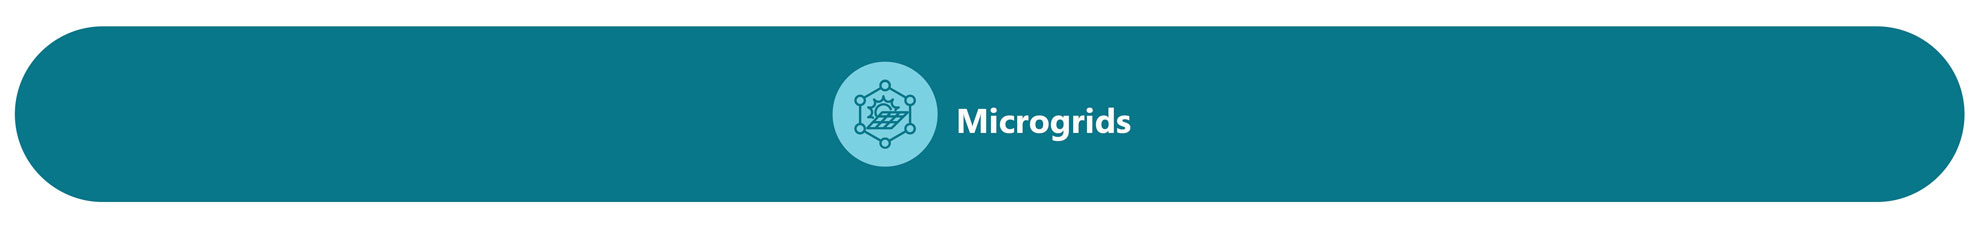 energy management microgrids